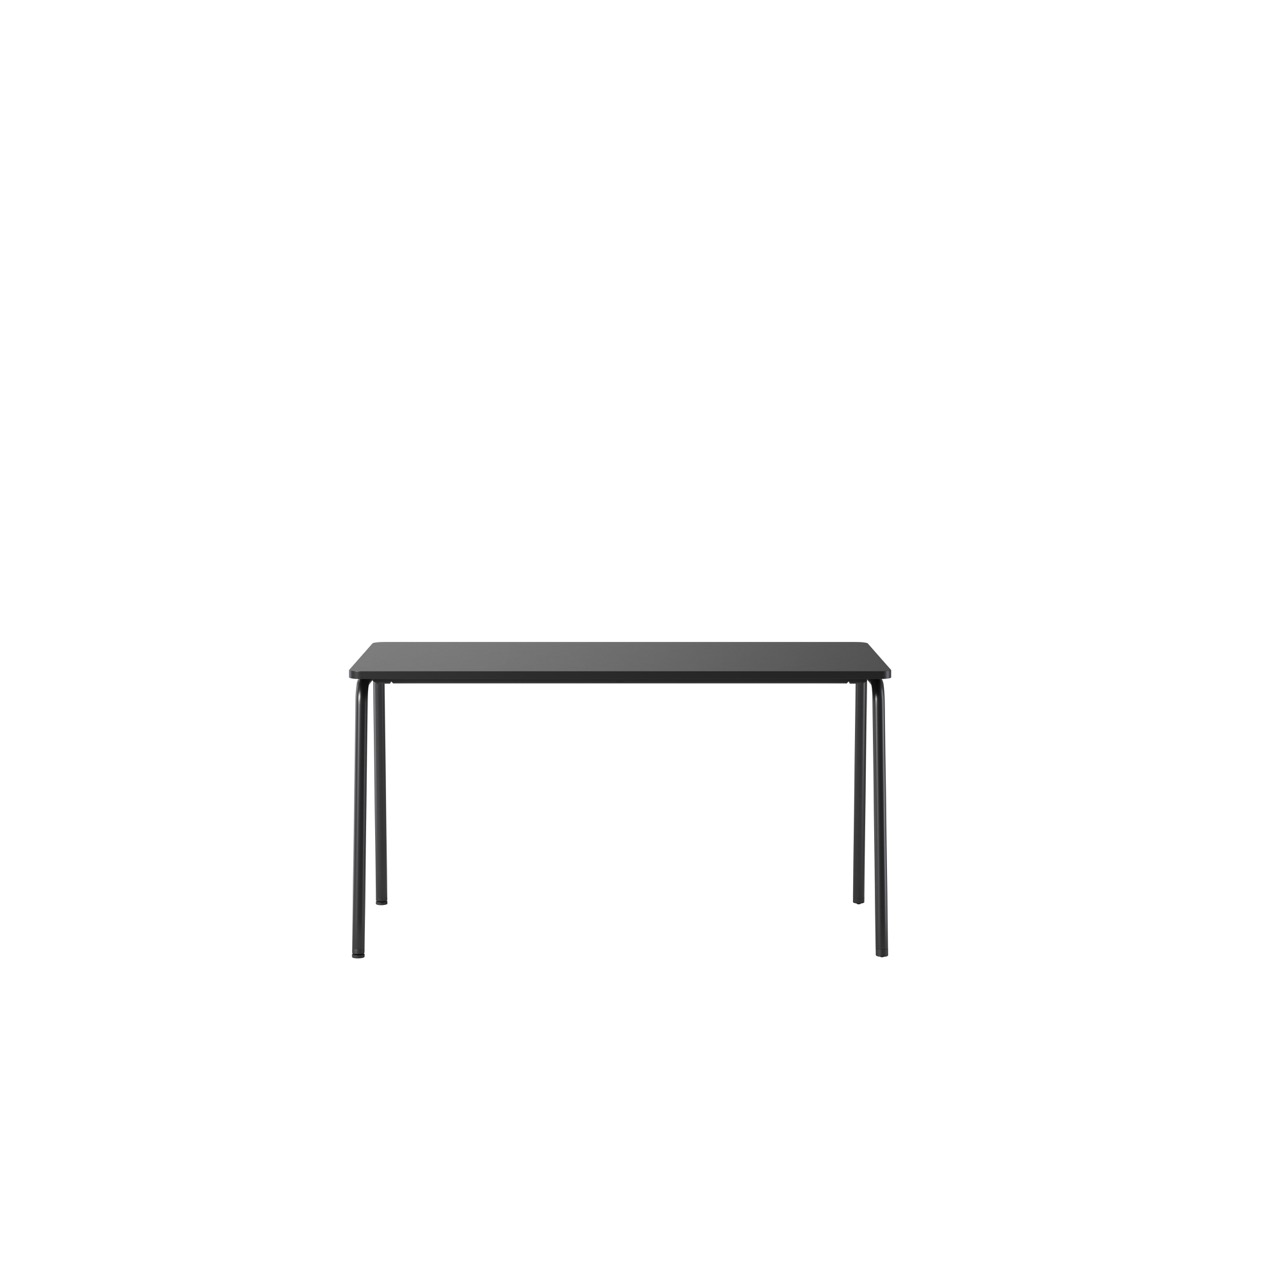 OCEE&FOUR - Tables - FourReal 74 - 140 x 70 - Angled - Packshot Image 3 Large